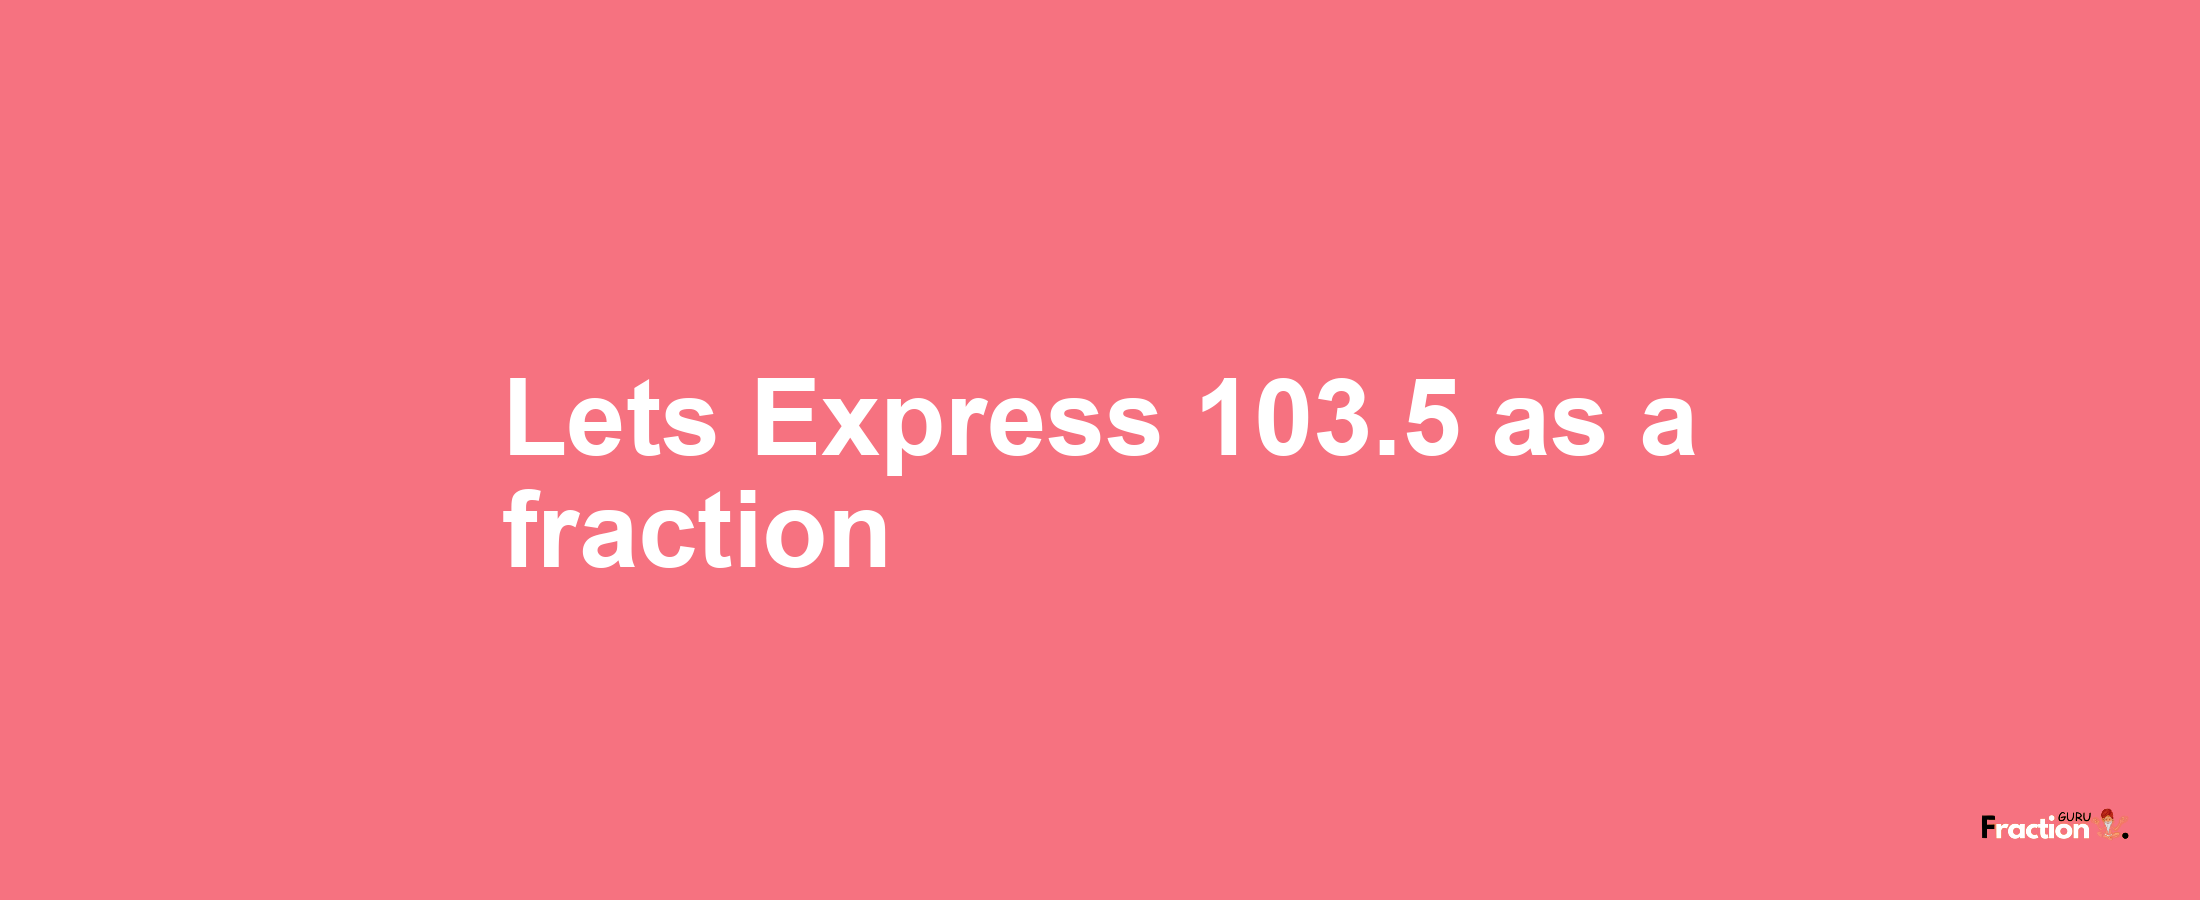 Lets Express 103.5 as afraction